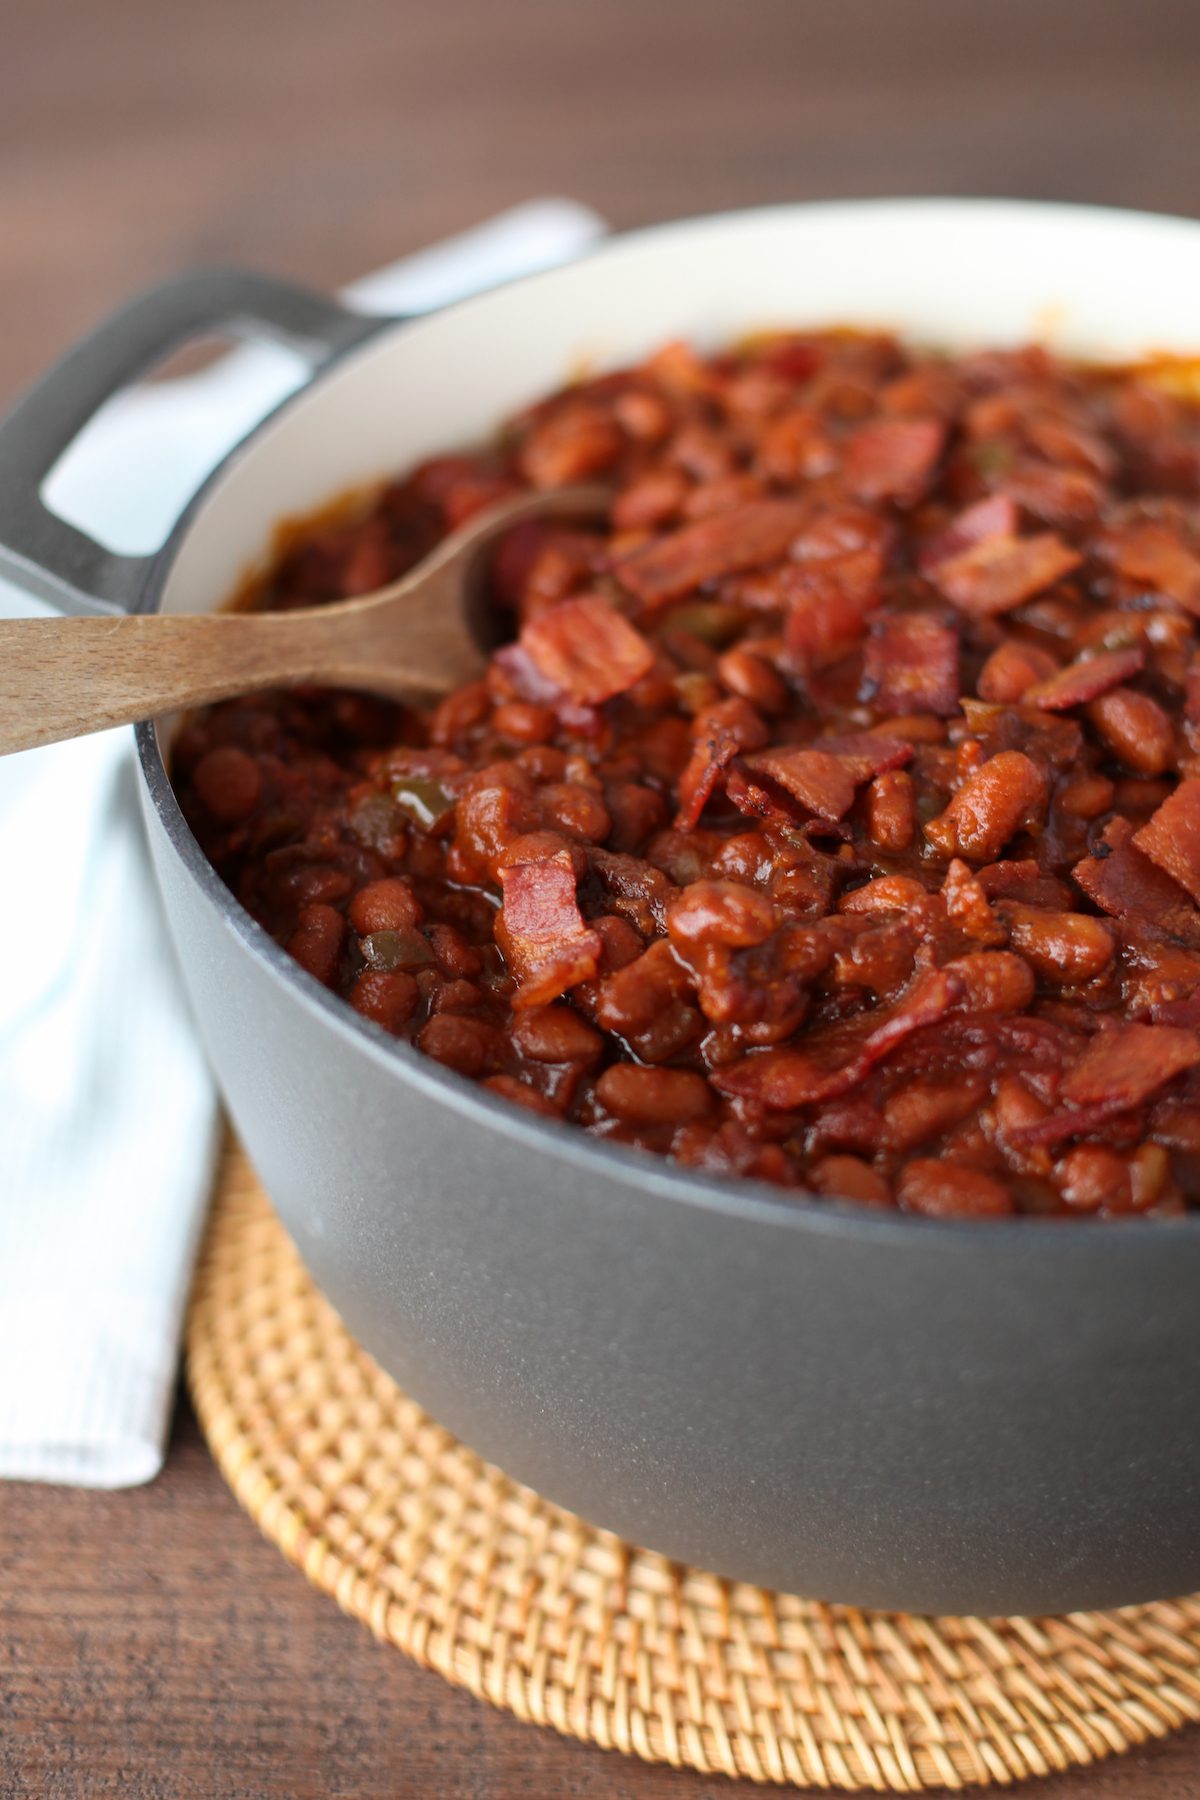 Dutch oven with Baked Beans and wooden spoon